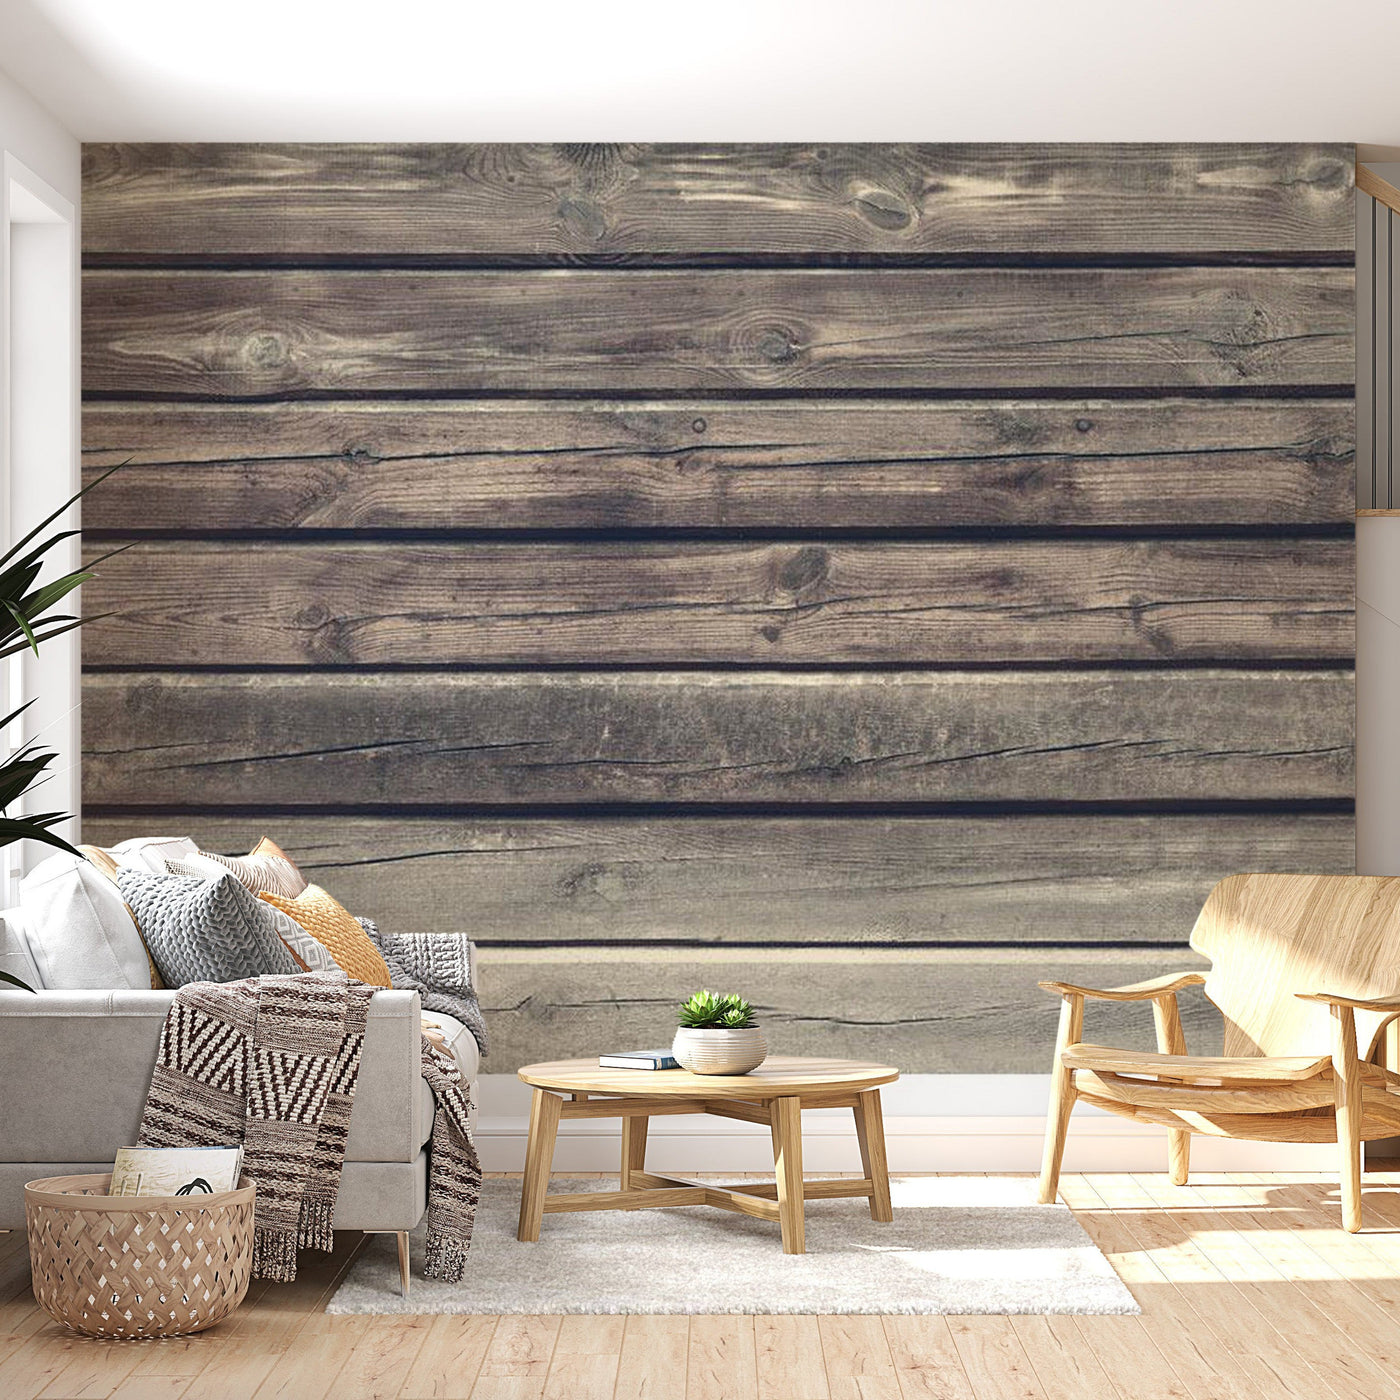 Peel & Stick Wall Mural - Country Style Wooden Planks - Removable Wall Decals